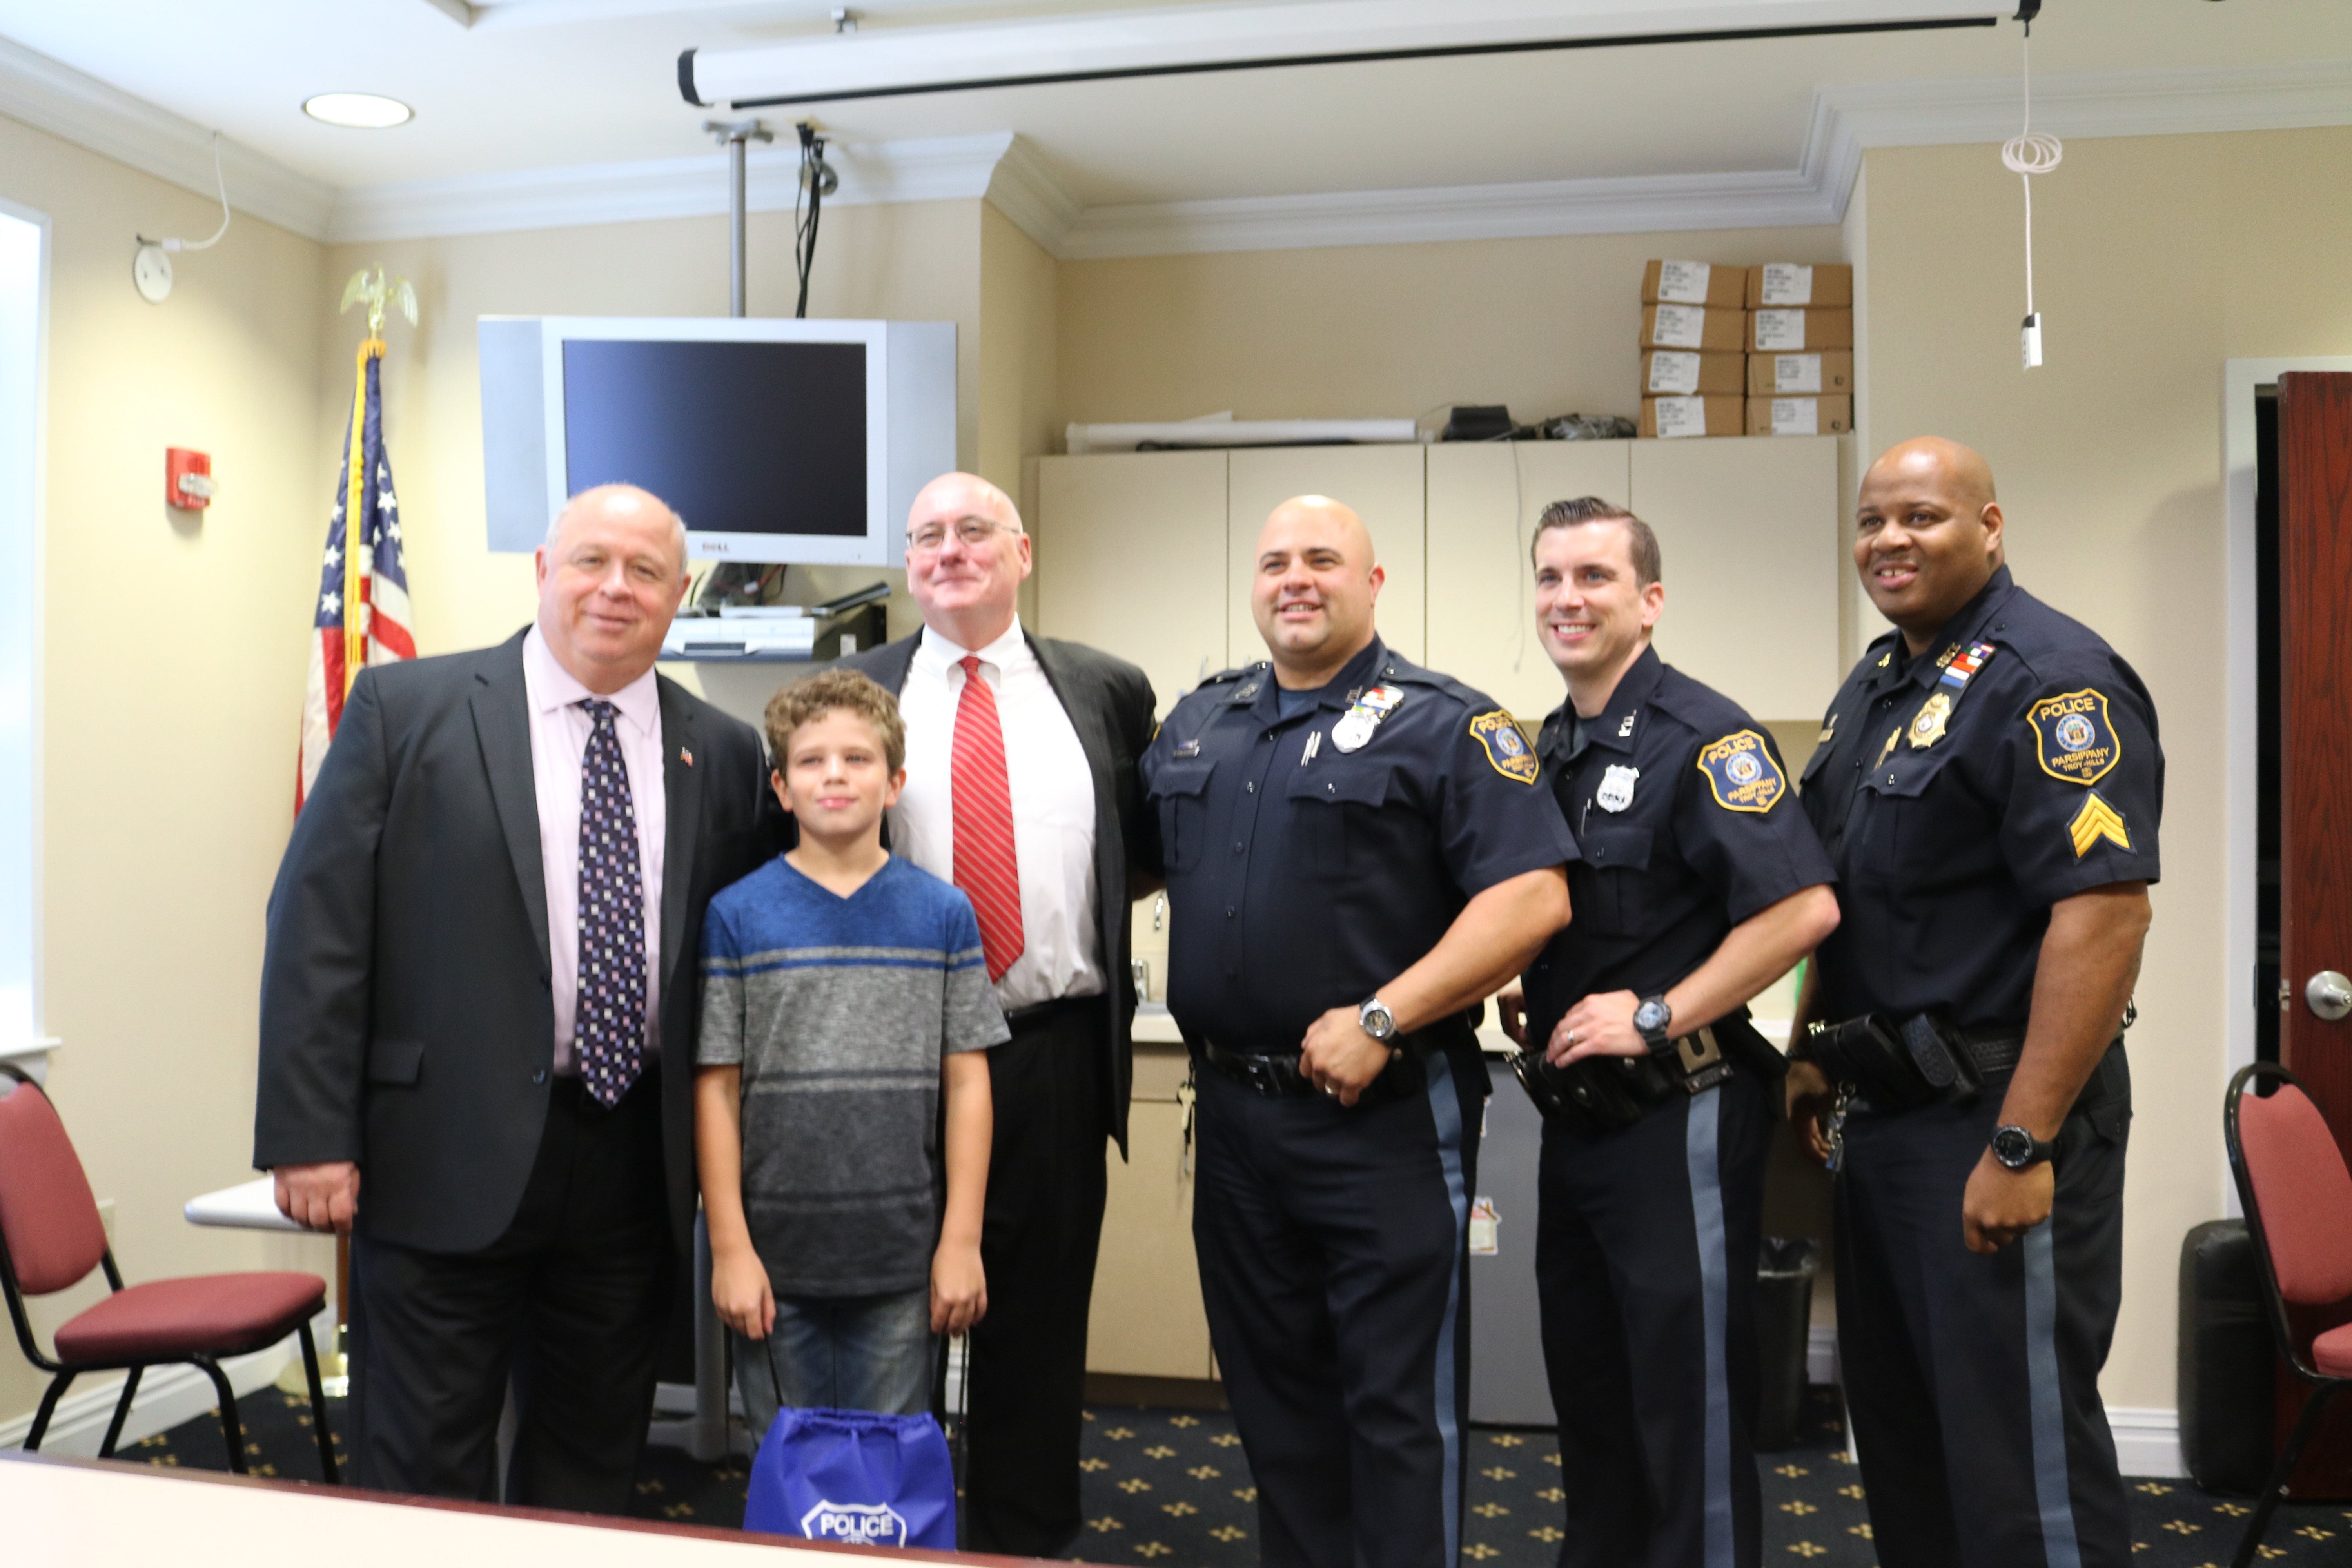 Eastlake Student becomes Police Officer for a Day